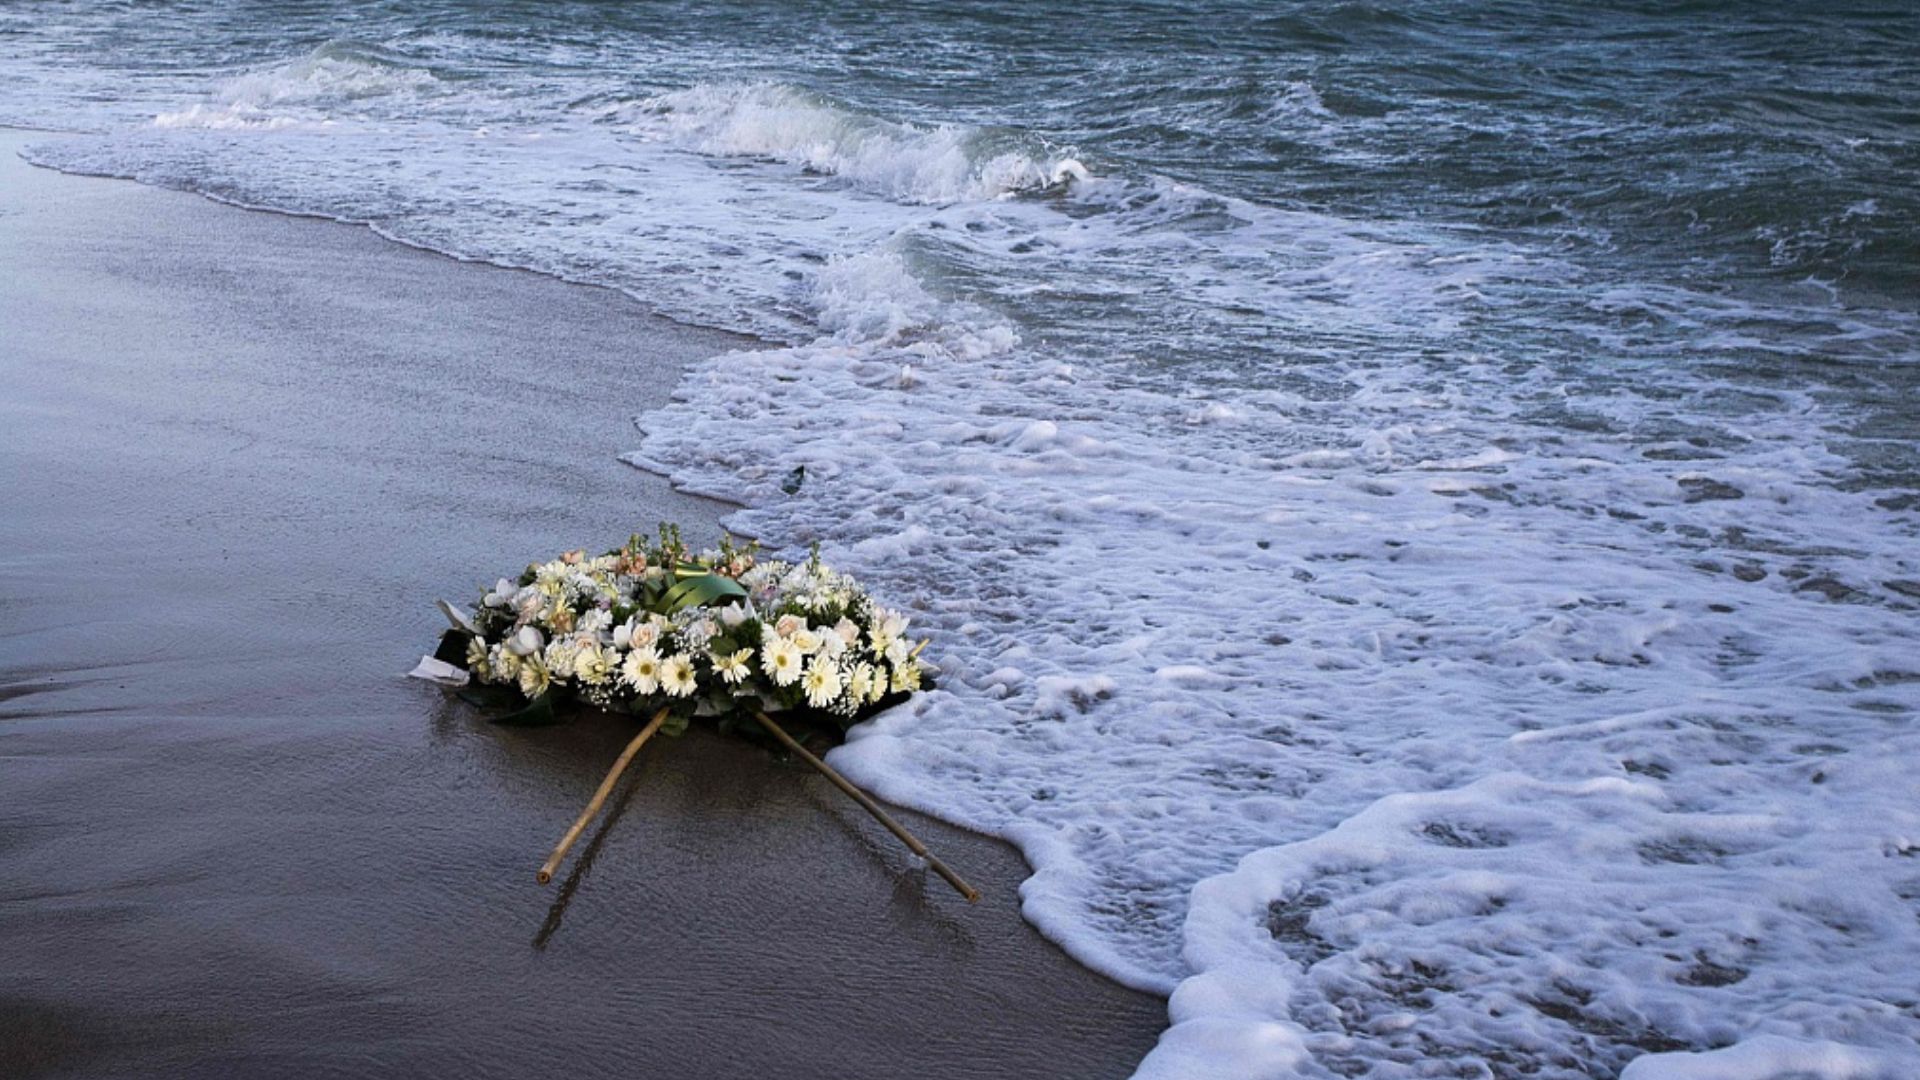 A wreath at the shore in the Calabria region of southern Italy after the shipwrecking of the Stecato di Cutro in February. /Gianluca Chininea/CFP
